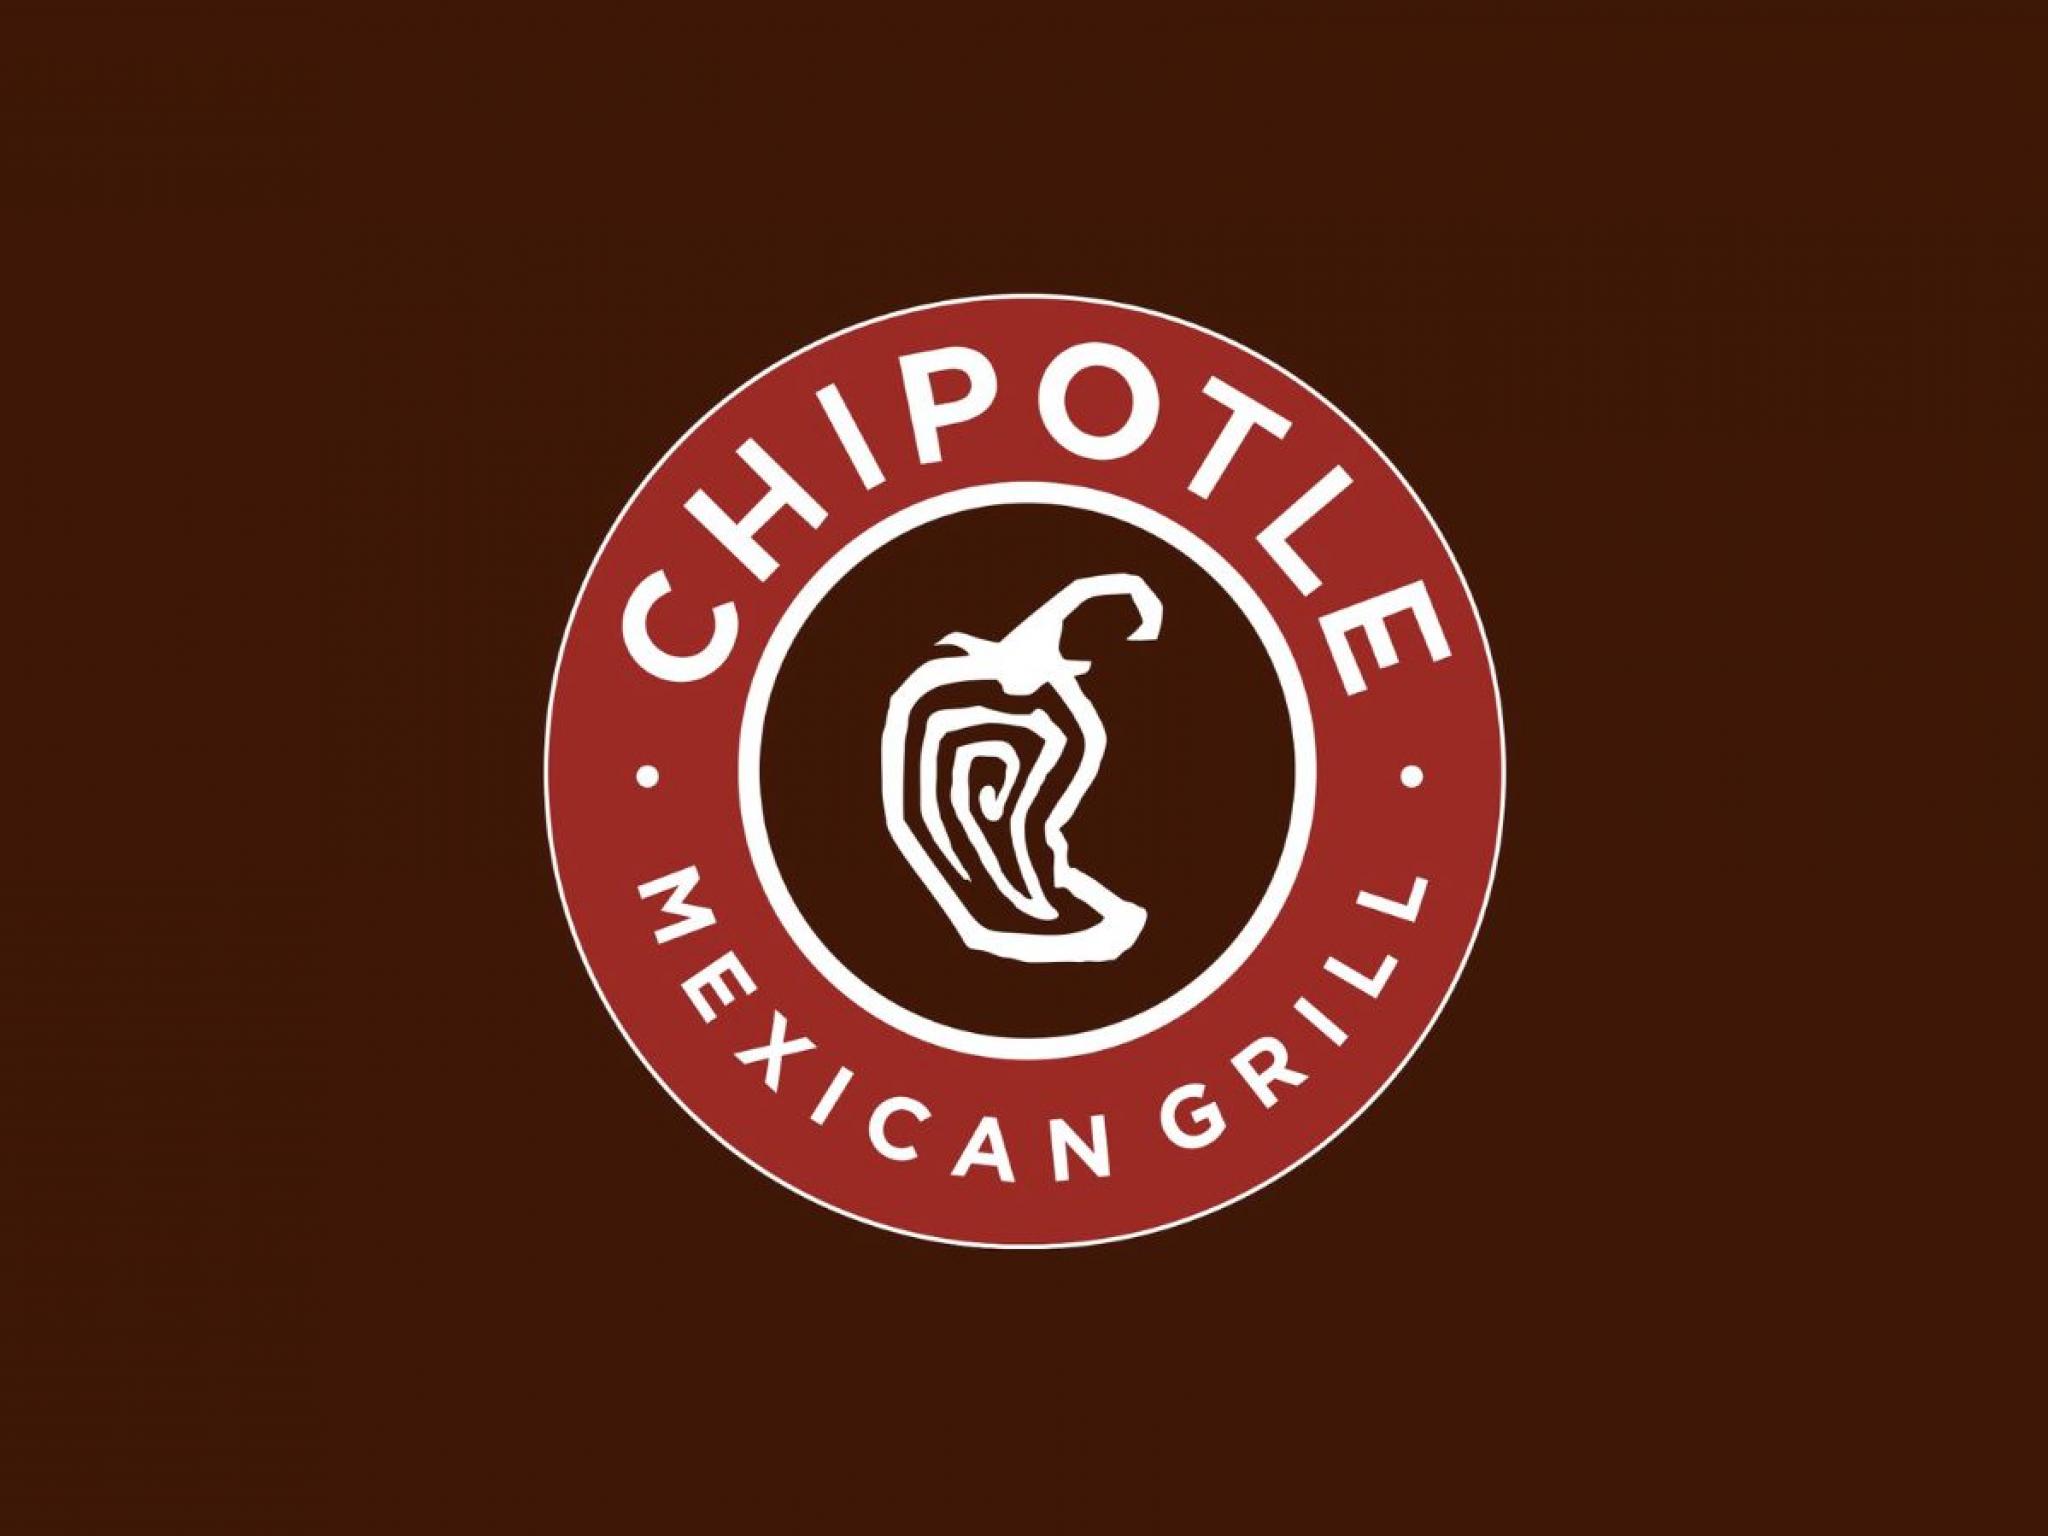  chipotle-posts-upbeat-earnings-joins-cirrus-logic-emerson-electric-carlyle-group-and-other-big-stocks-moving-higher-on-wednesday 